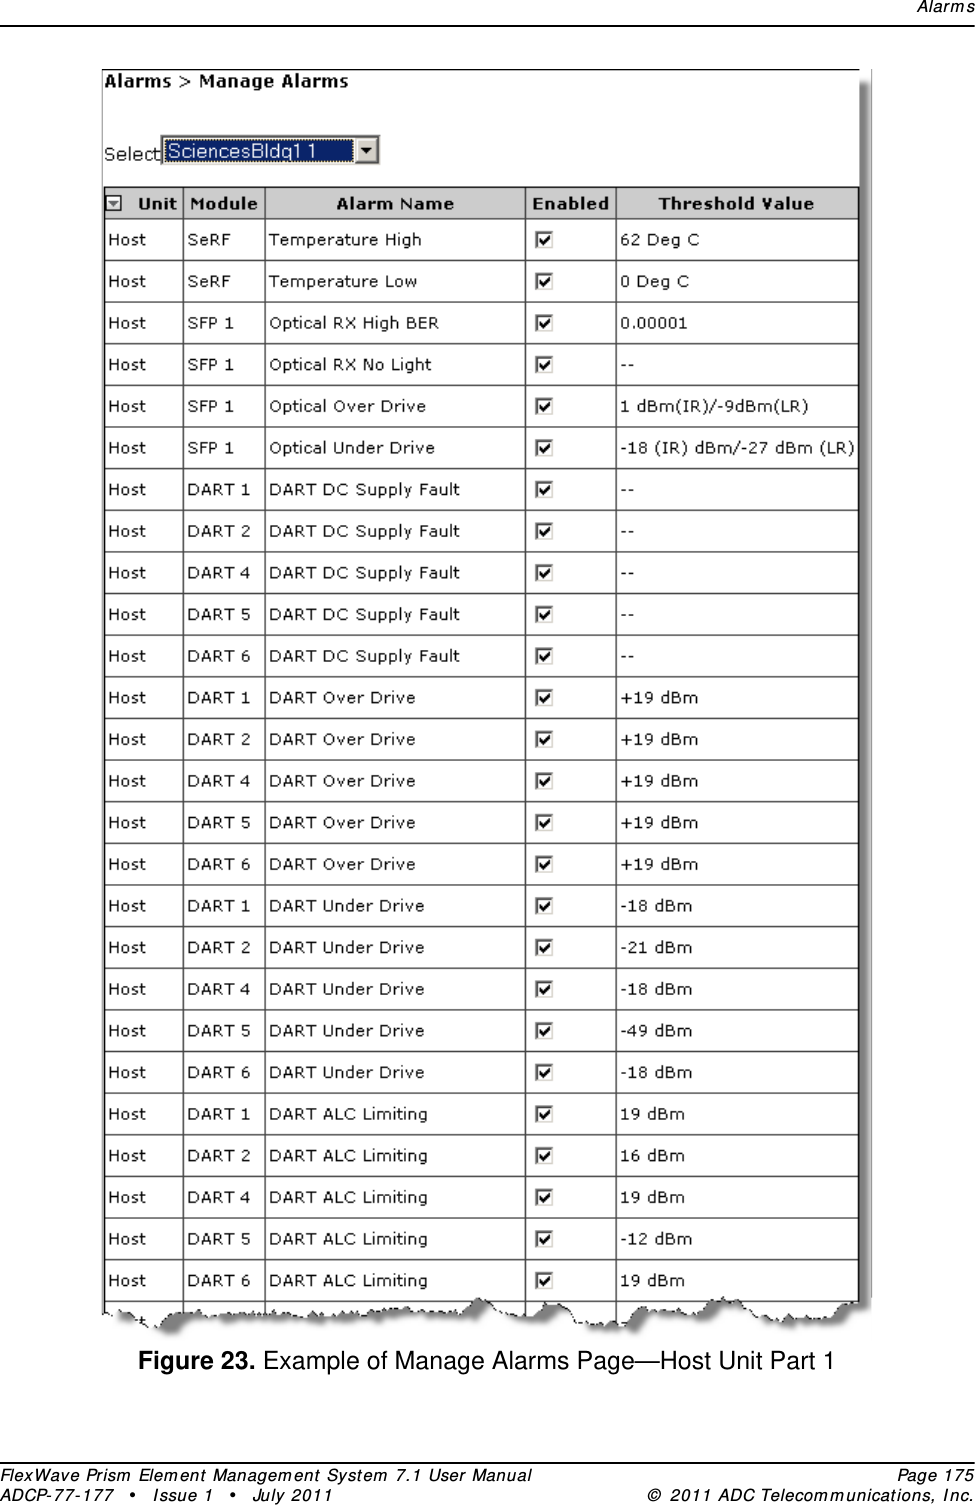 Alar m sFlexWave Prism  Elem ent Managem ent  Syst em  7.1 User Manual Page 175ADCP- 77- 177  • I ssue 1 • July 2011 ©  2011 ADC Telecom m unicat ions, I nc.Figure 23. Example of Manage Alarms Page—Host Unit Part 1